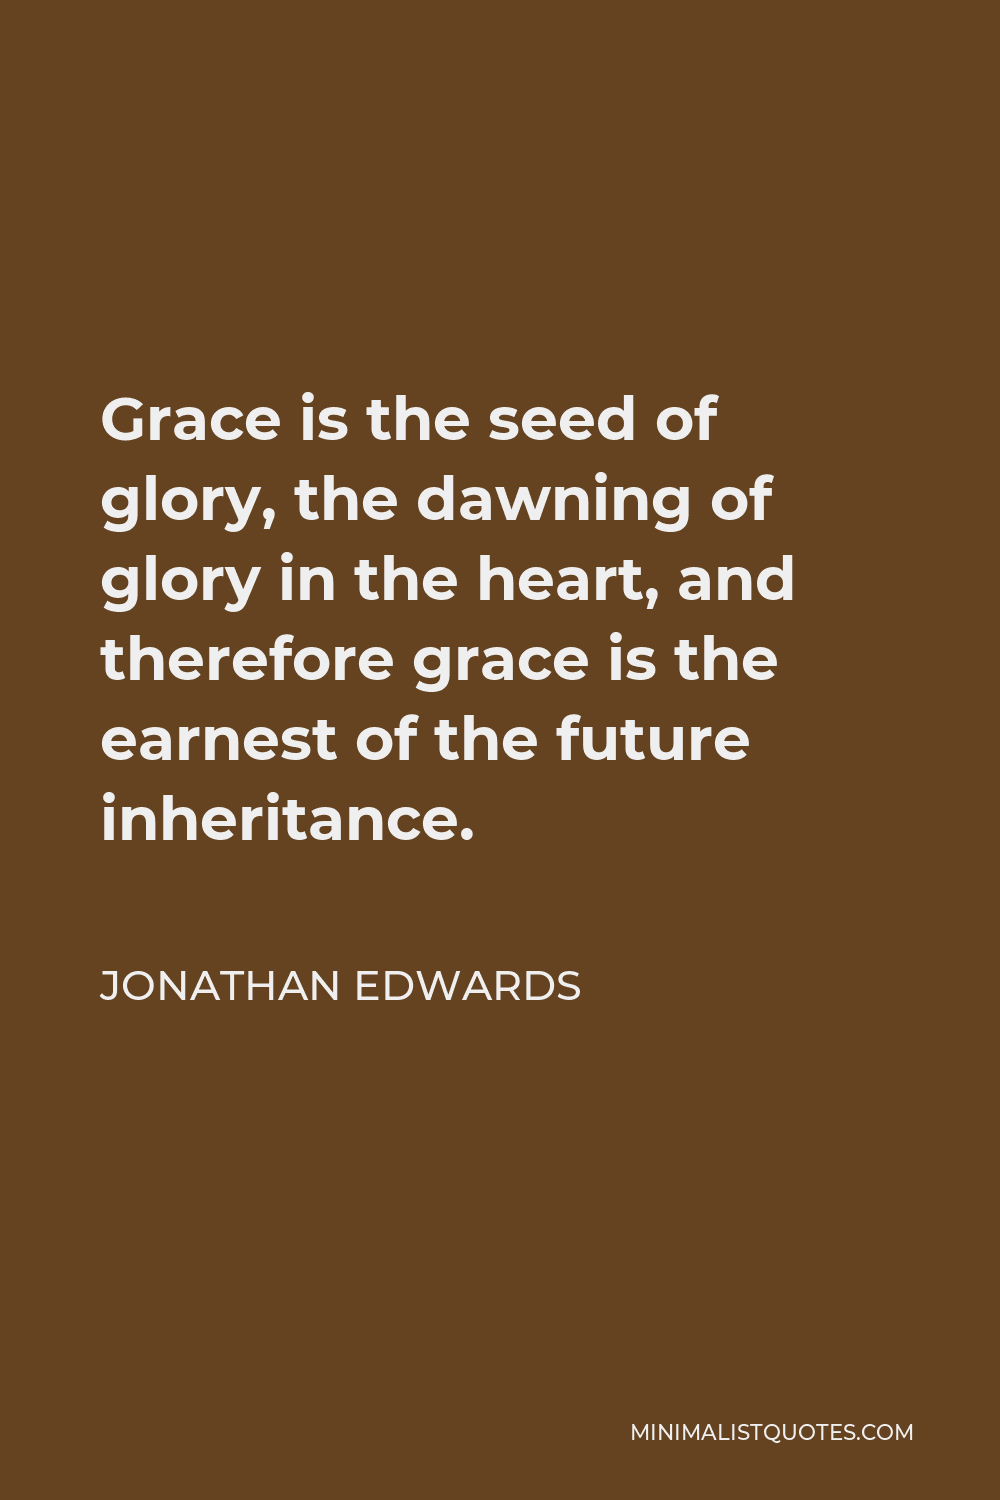 Jonathan Edwards Quote - Grace is the seed of glory, the dawning of glory in the heart, and therefore grace is the earnest of the future inheritance.